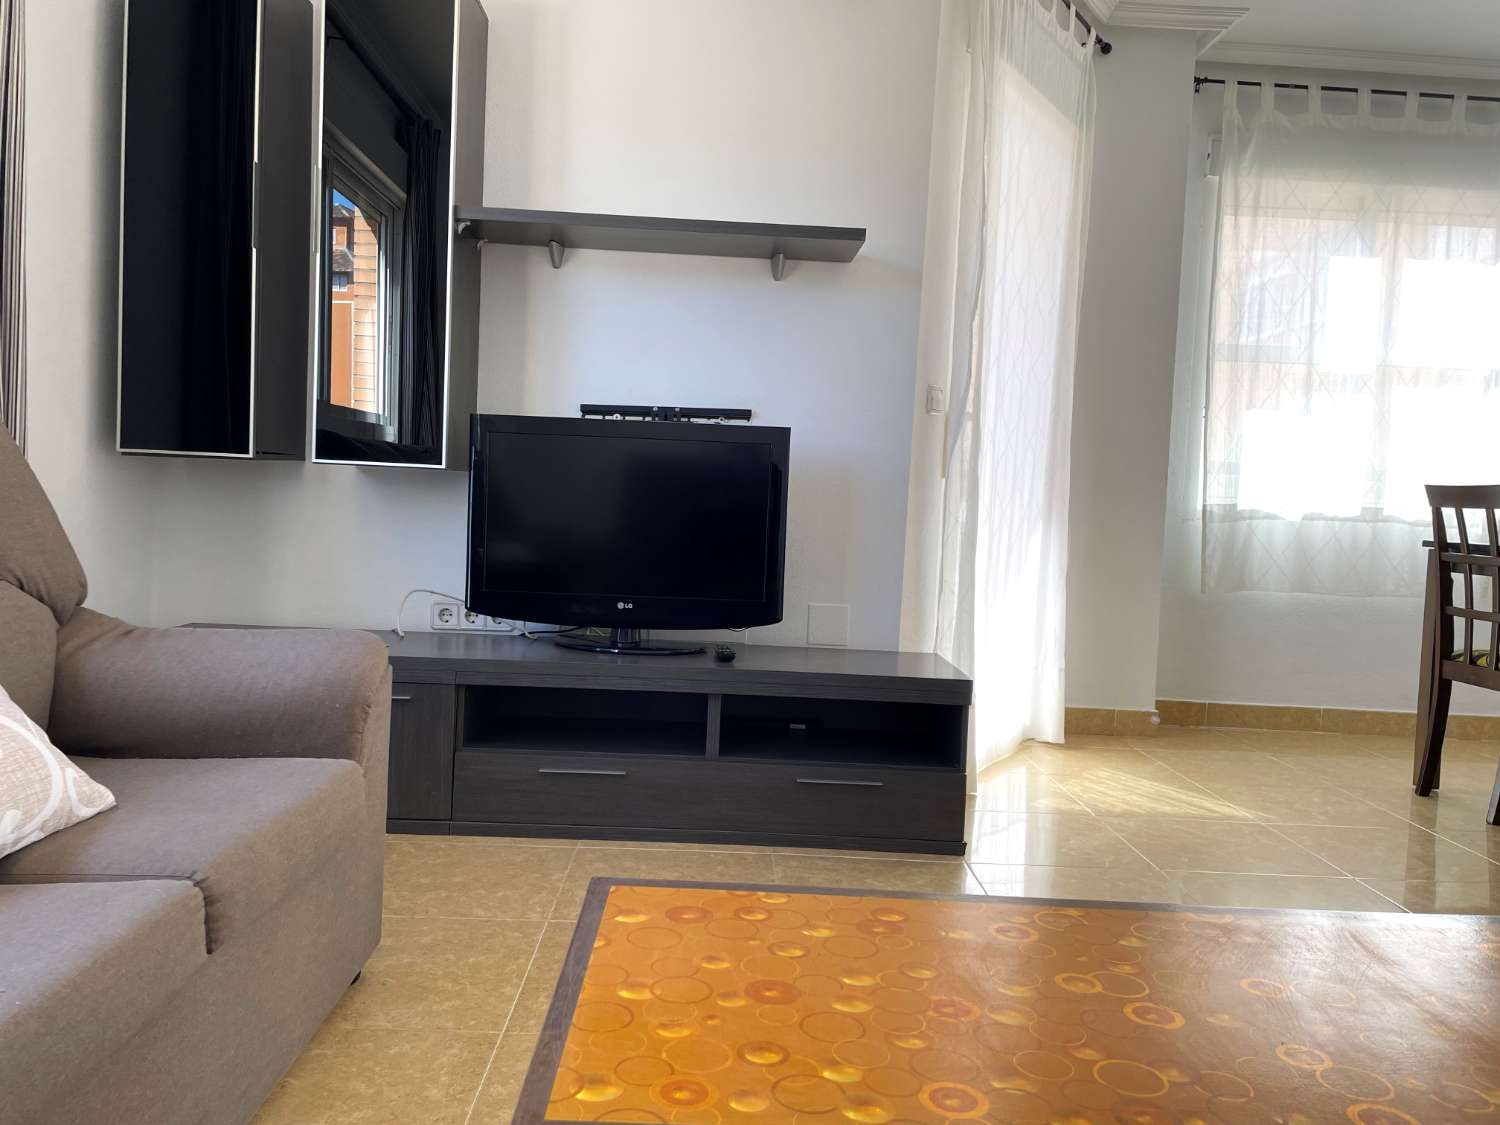 SPACIOUS FURNISHED APARTMENT AND GARAGE